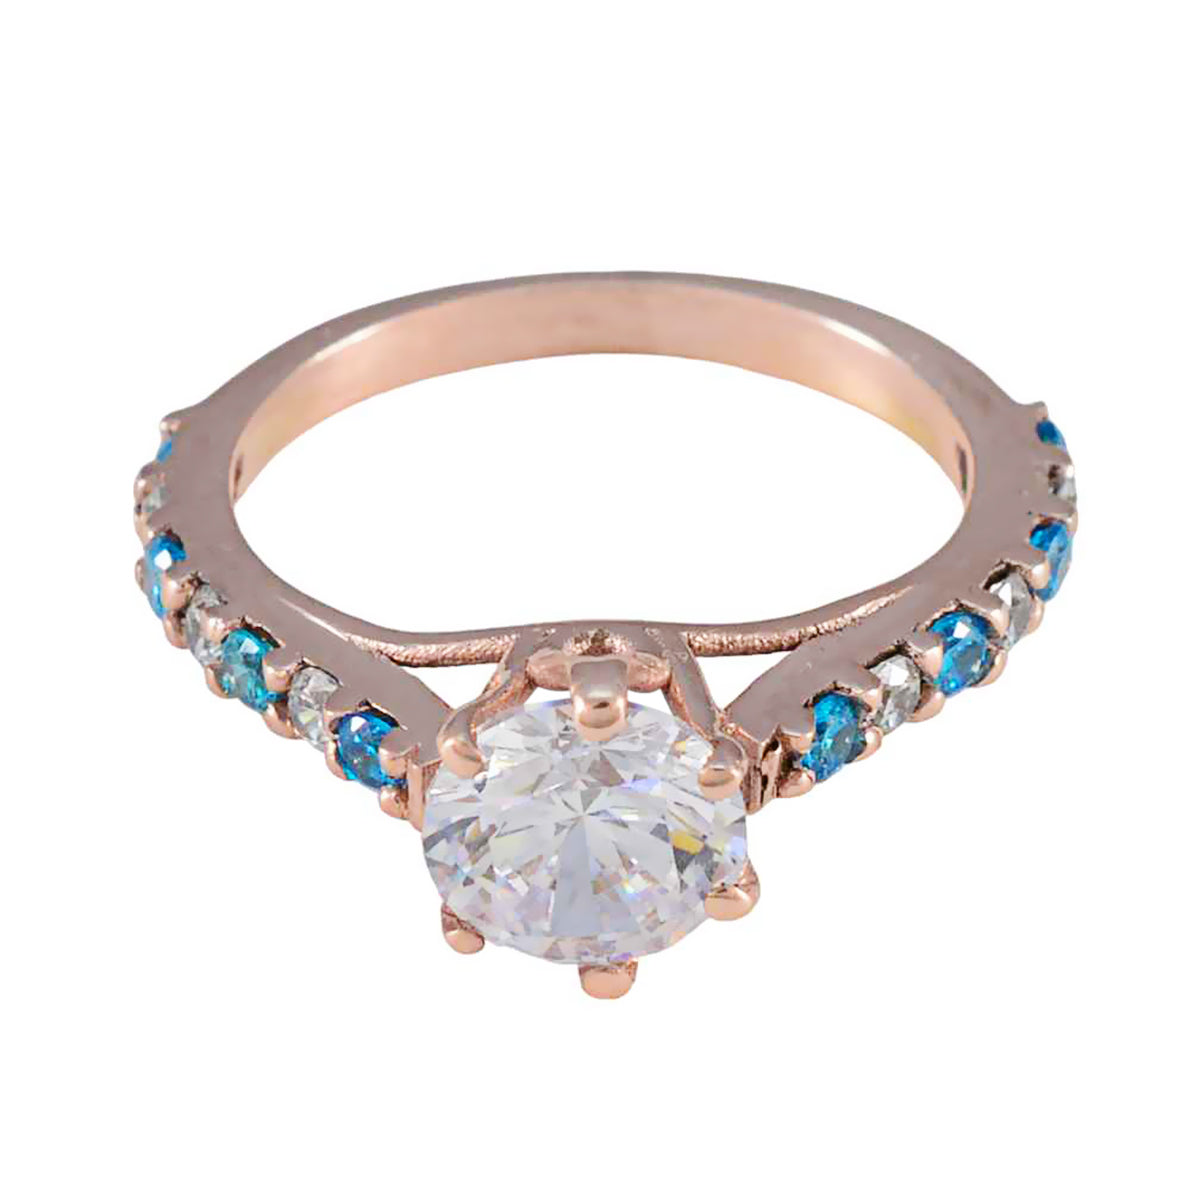 Riyo Best Silver Ring With Rose Gold Plating Blue Topaz CZ Stone Round Shape Prong Setting Antique Jewelry Cocktail Ring